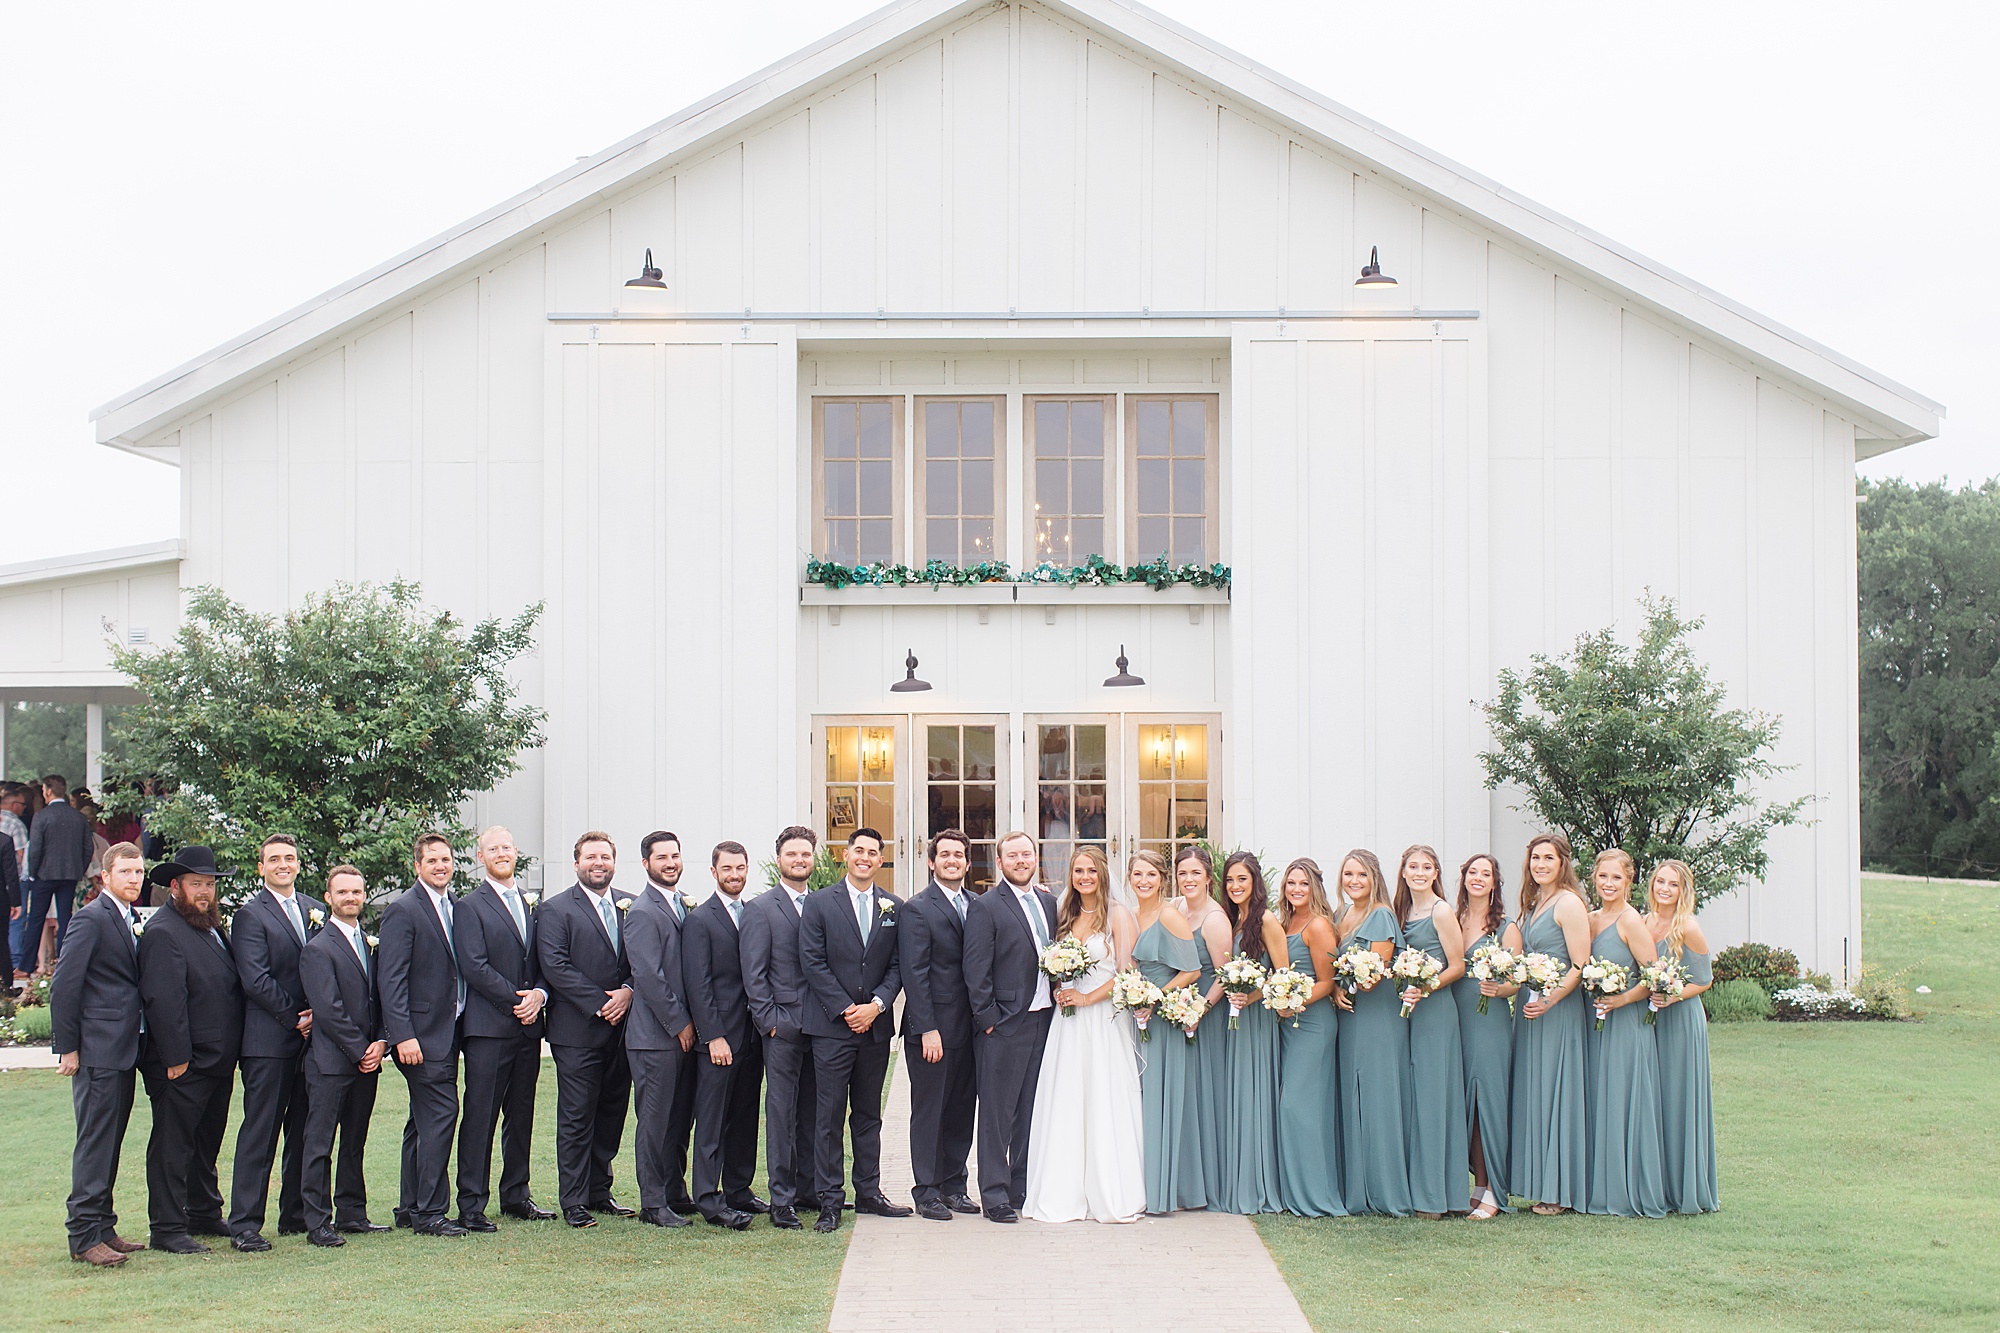 bride and groom pose with wedding party in teal and grey